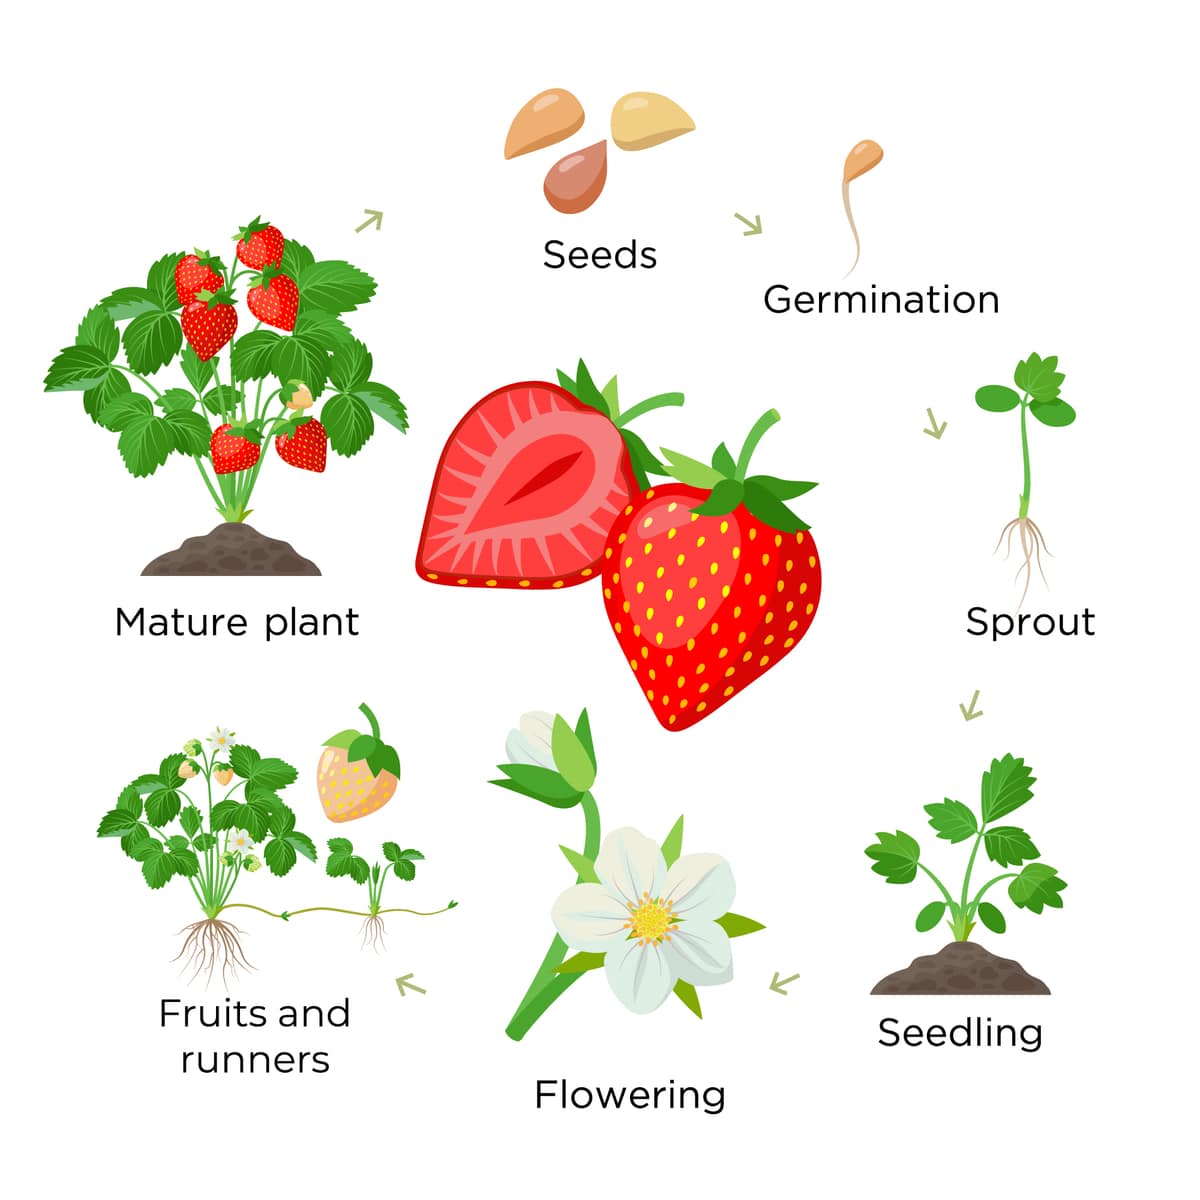 https://strawberryplants.org/wp-content/uploads/How-to-Germinate-Strawberry-Seeds-featured.jpg